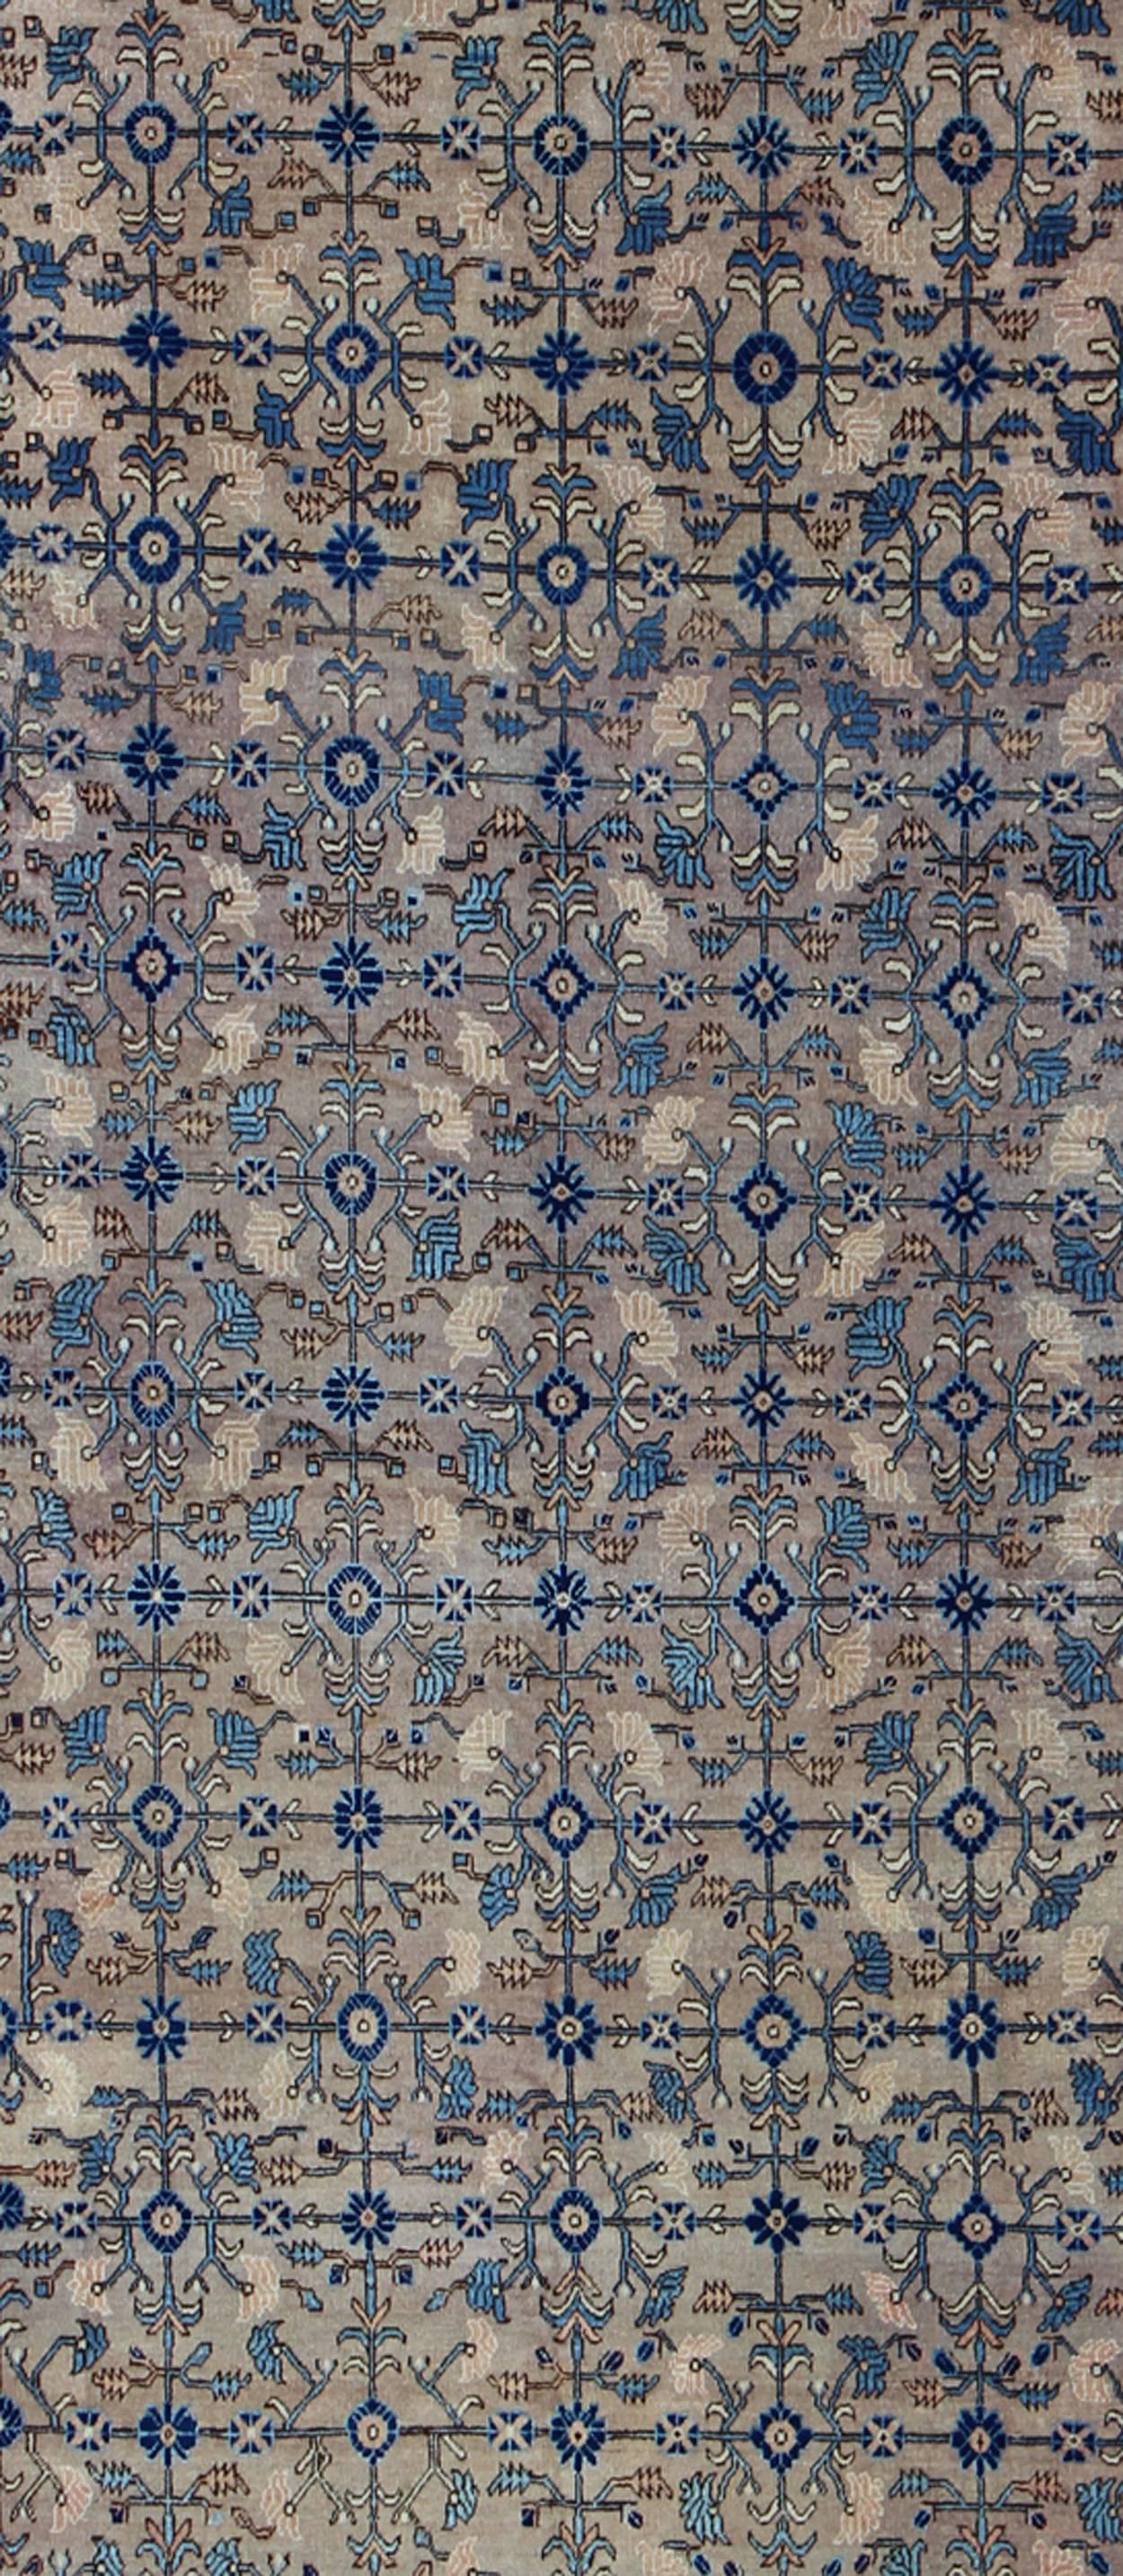 East Turkestani Antique Khotan Rug with All-Over Floral Blossom Design in Gray, Ivory and Blue